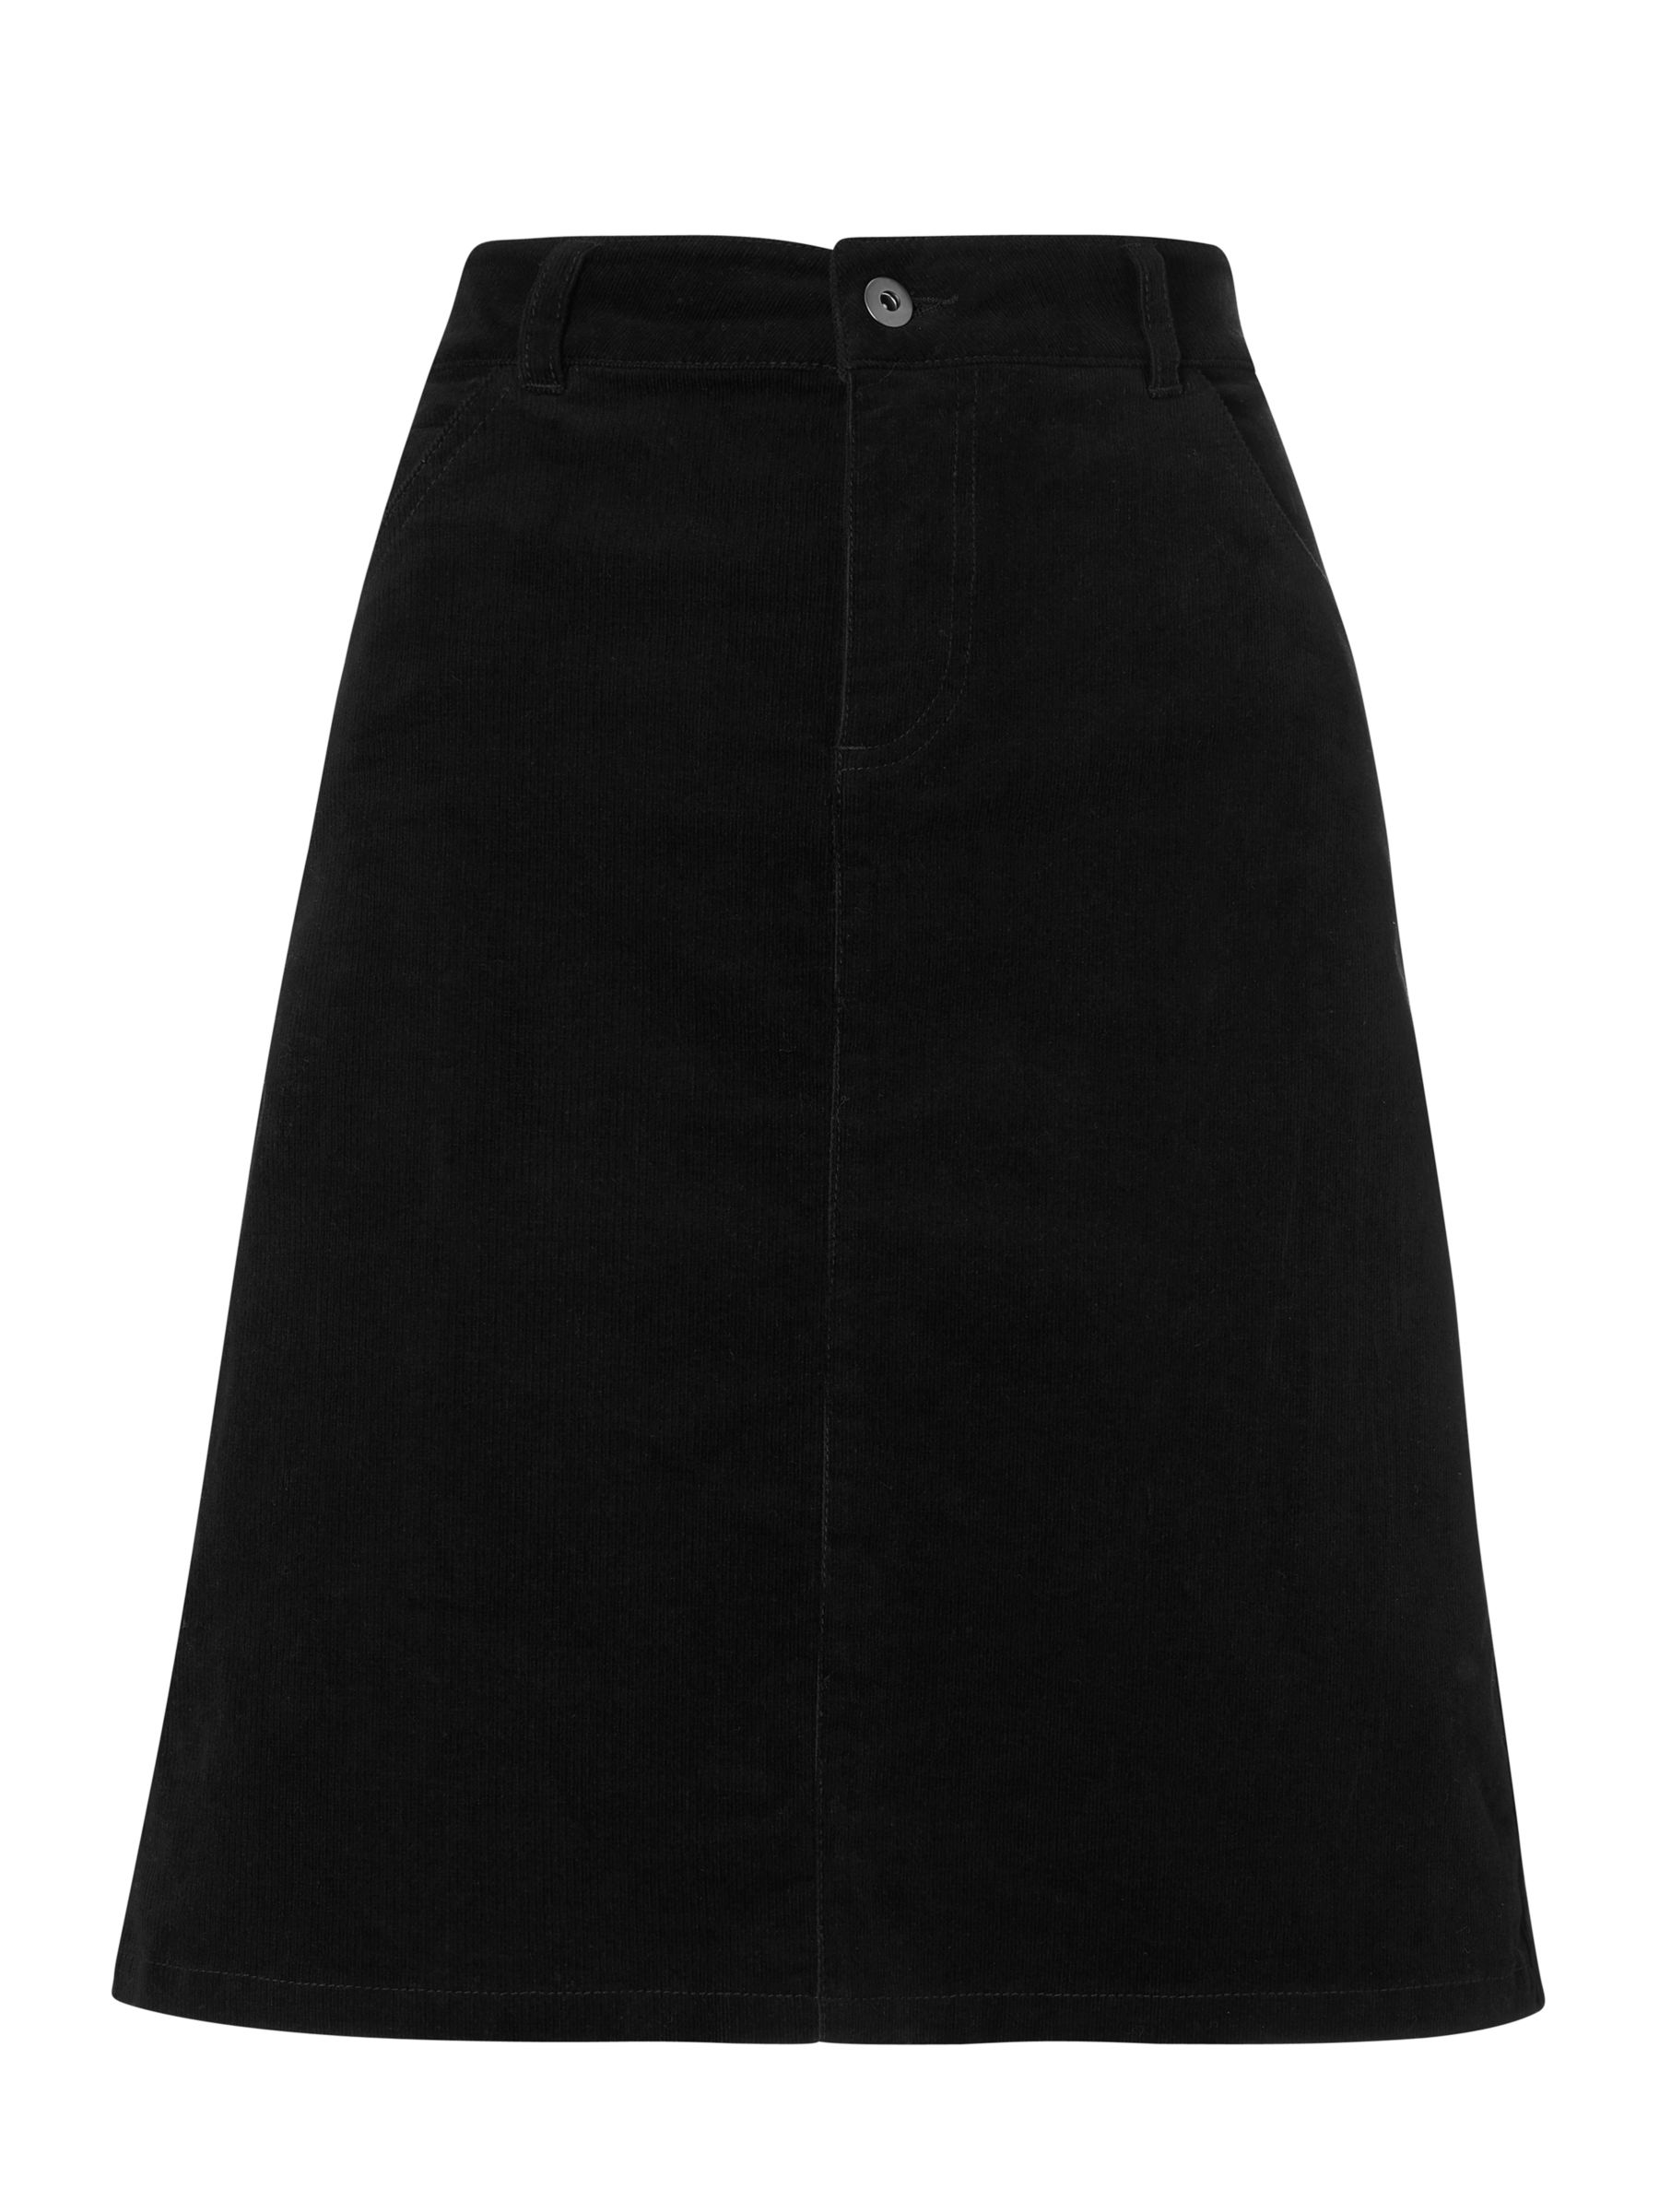 Collection WEEKEND by John Lewis Cord Skirt at John Lewis & Partners